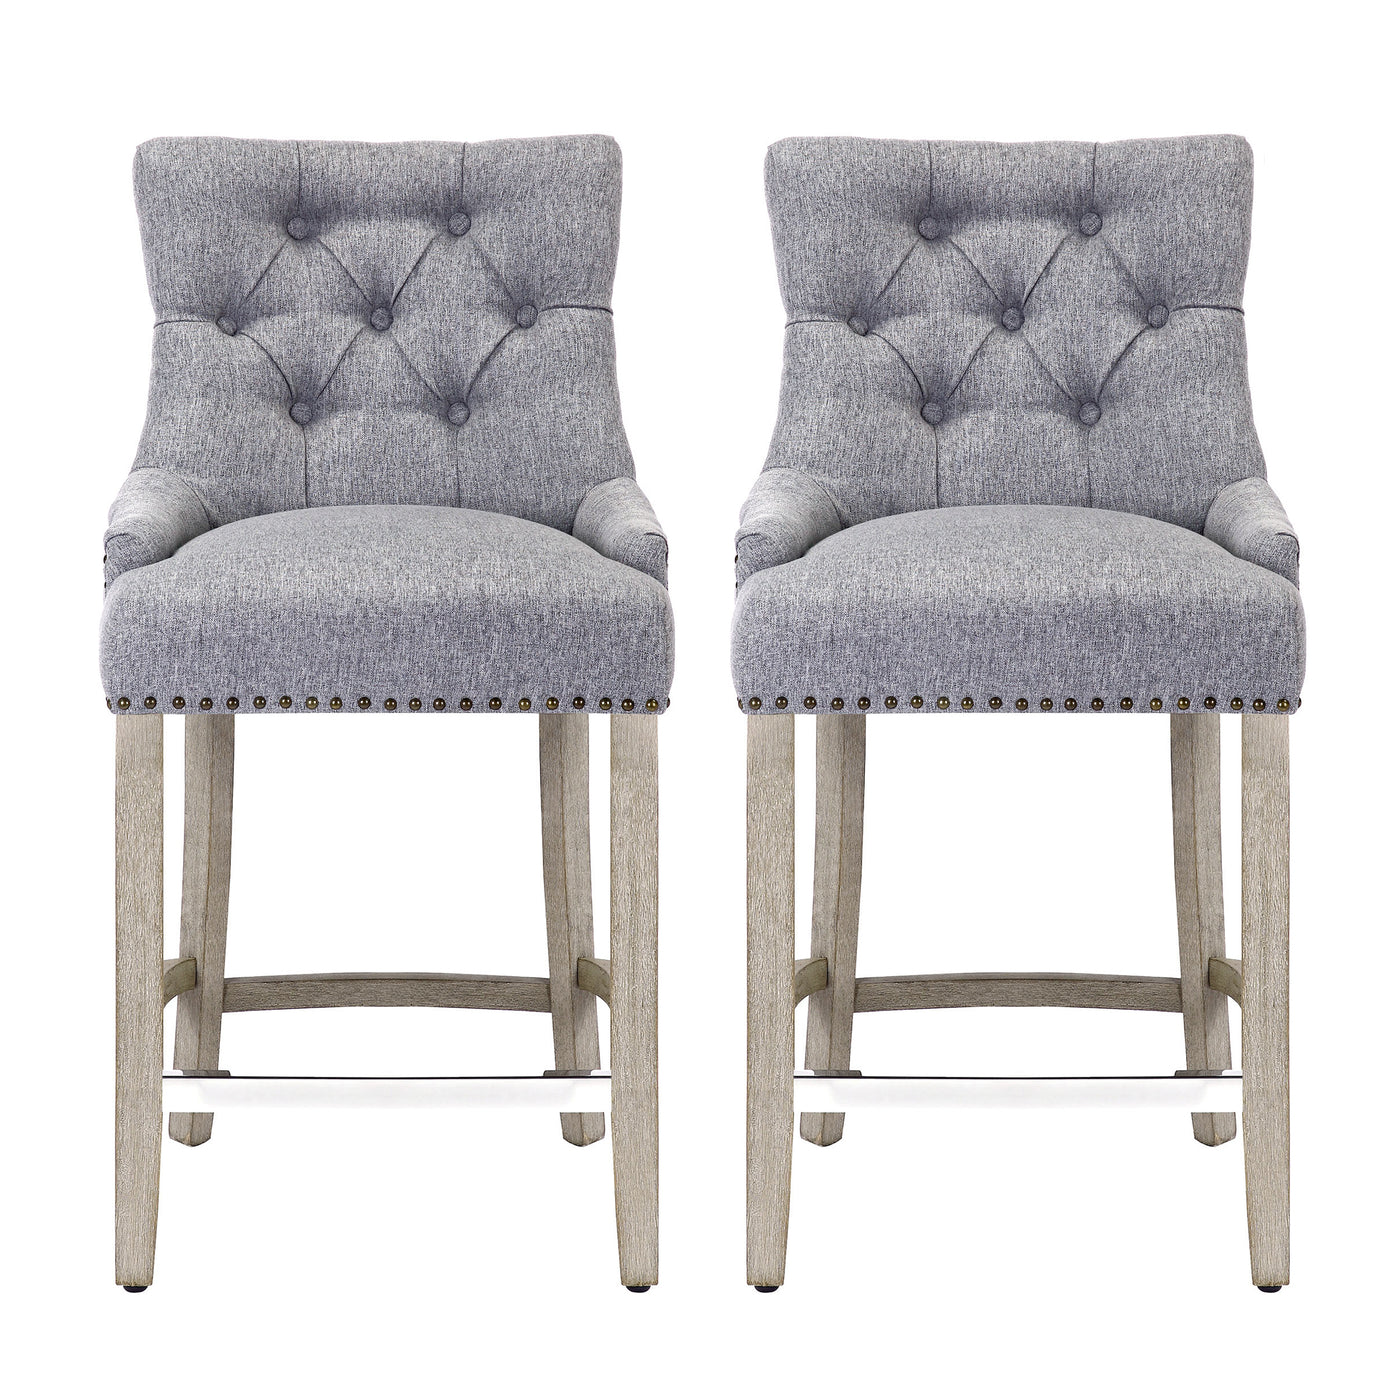 Hayes 24" Upholstered Tufted Wood Bar Stool (Set of 2), Antique Gray